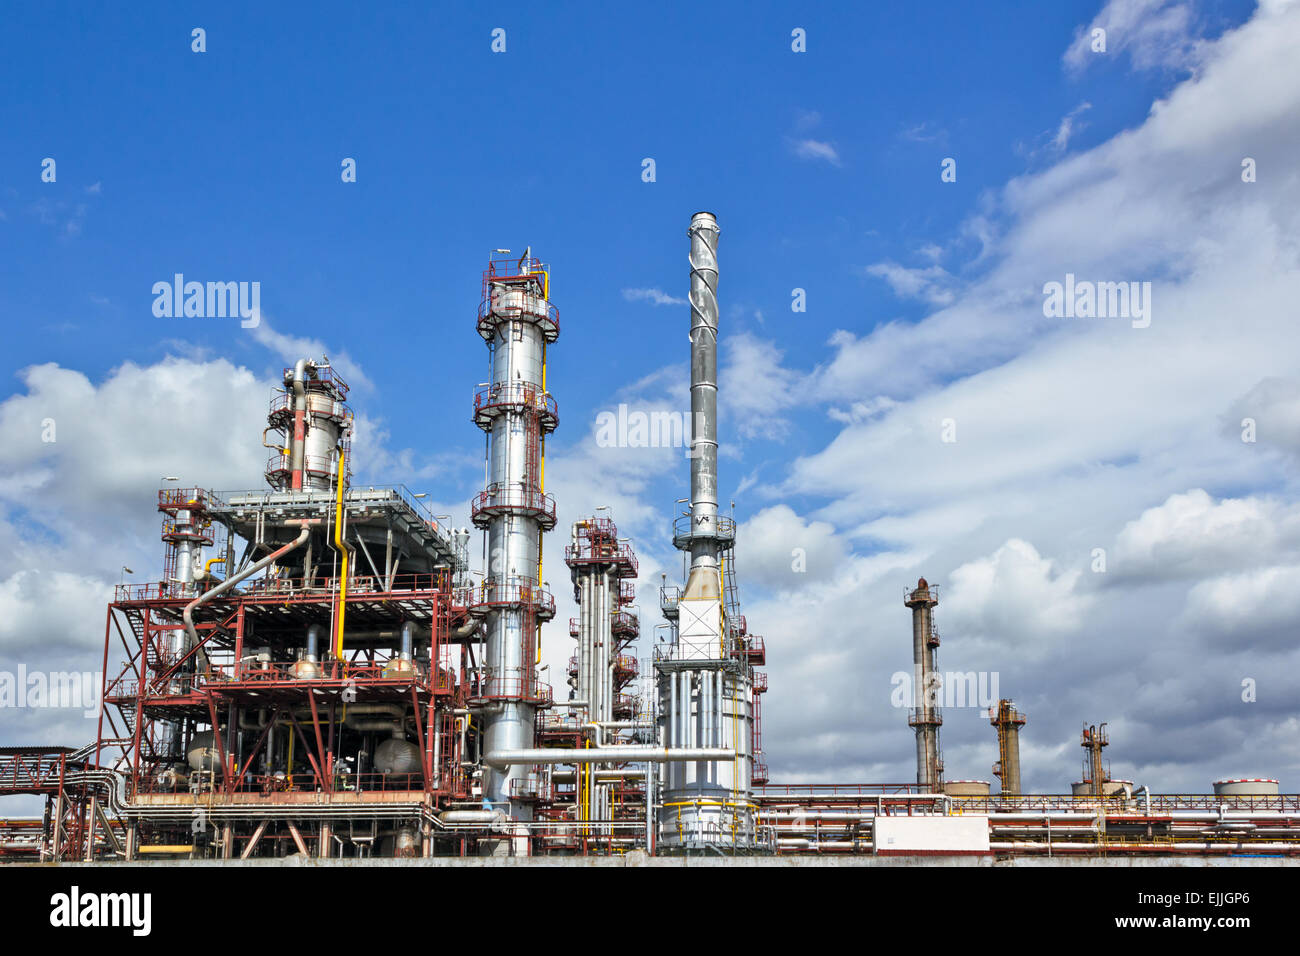 Oil refinery building under cloudy sky Stock Photo